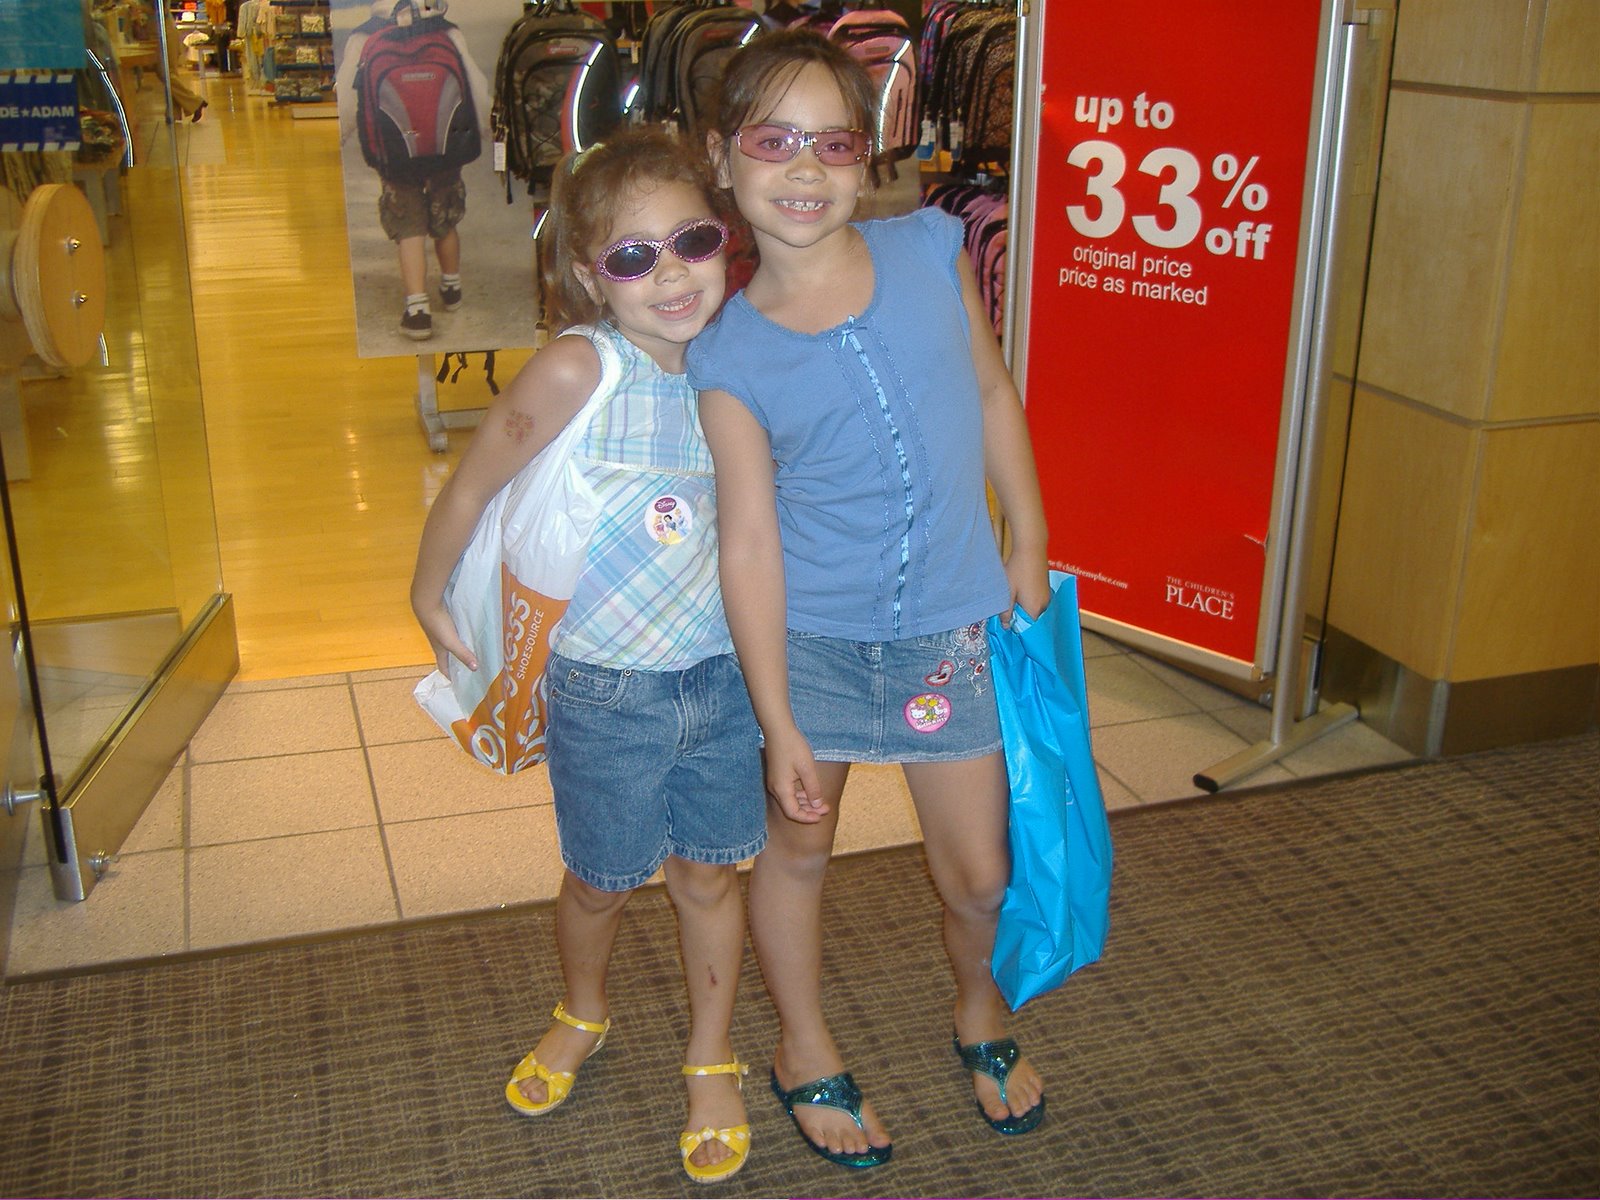 [Girlie+Girls+Shopping+Trip+-+after+shoes,+new+sunglasses!.JPG]